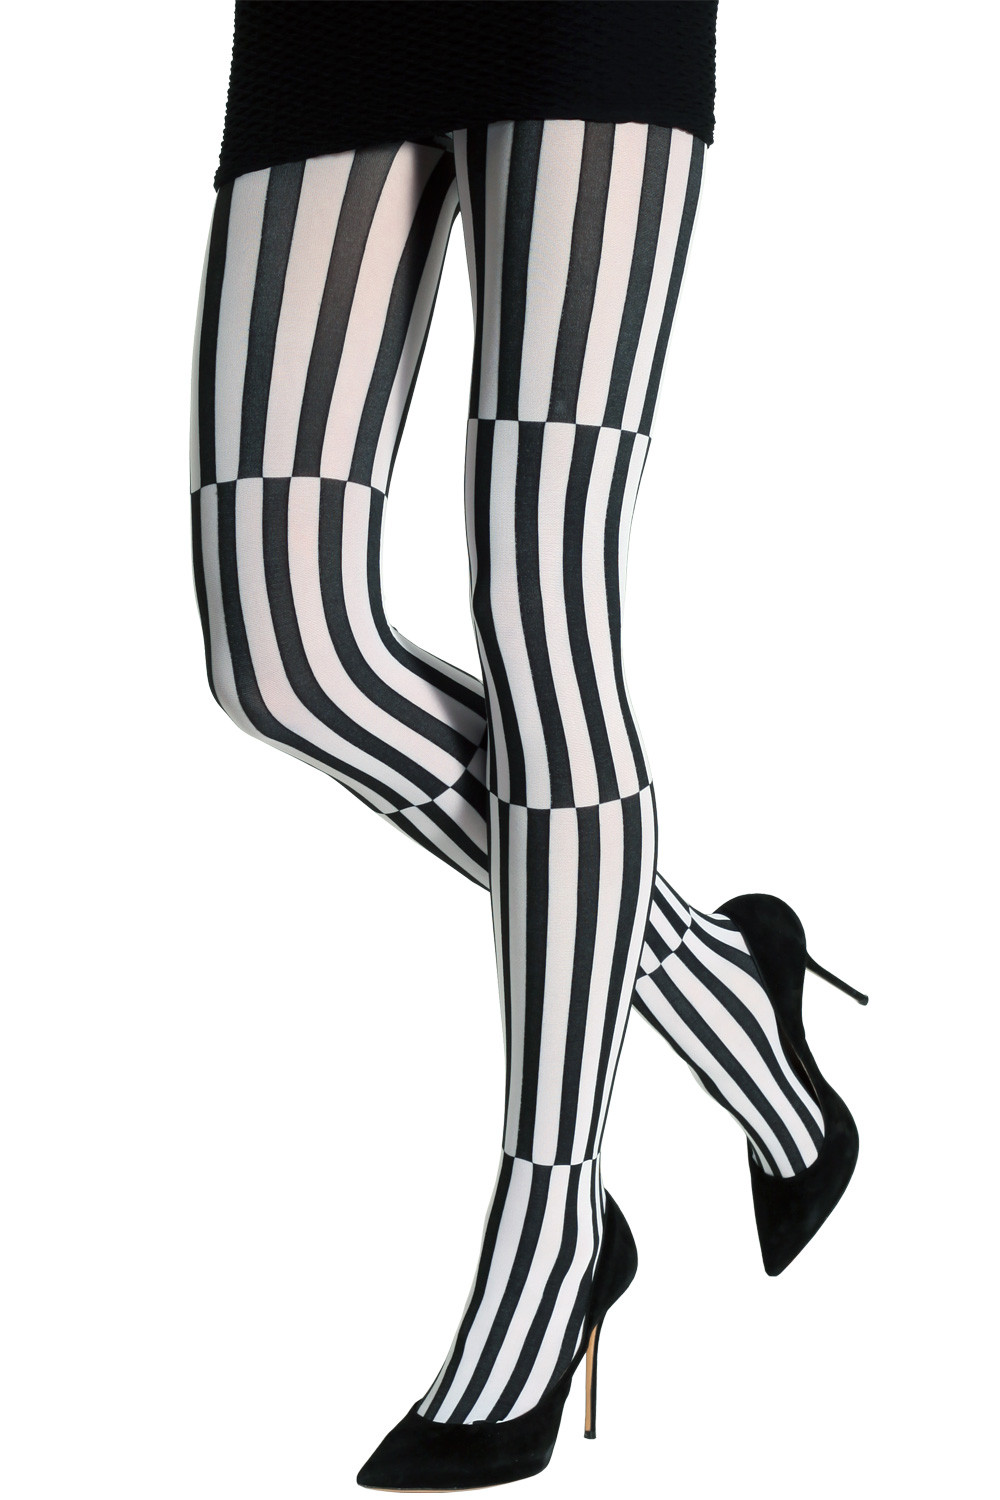 Black Gothic Stockings Striped Tights Pantyhose With Vertical